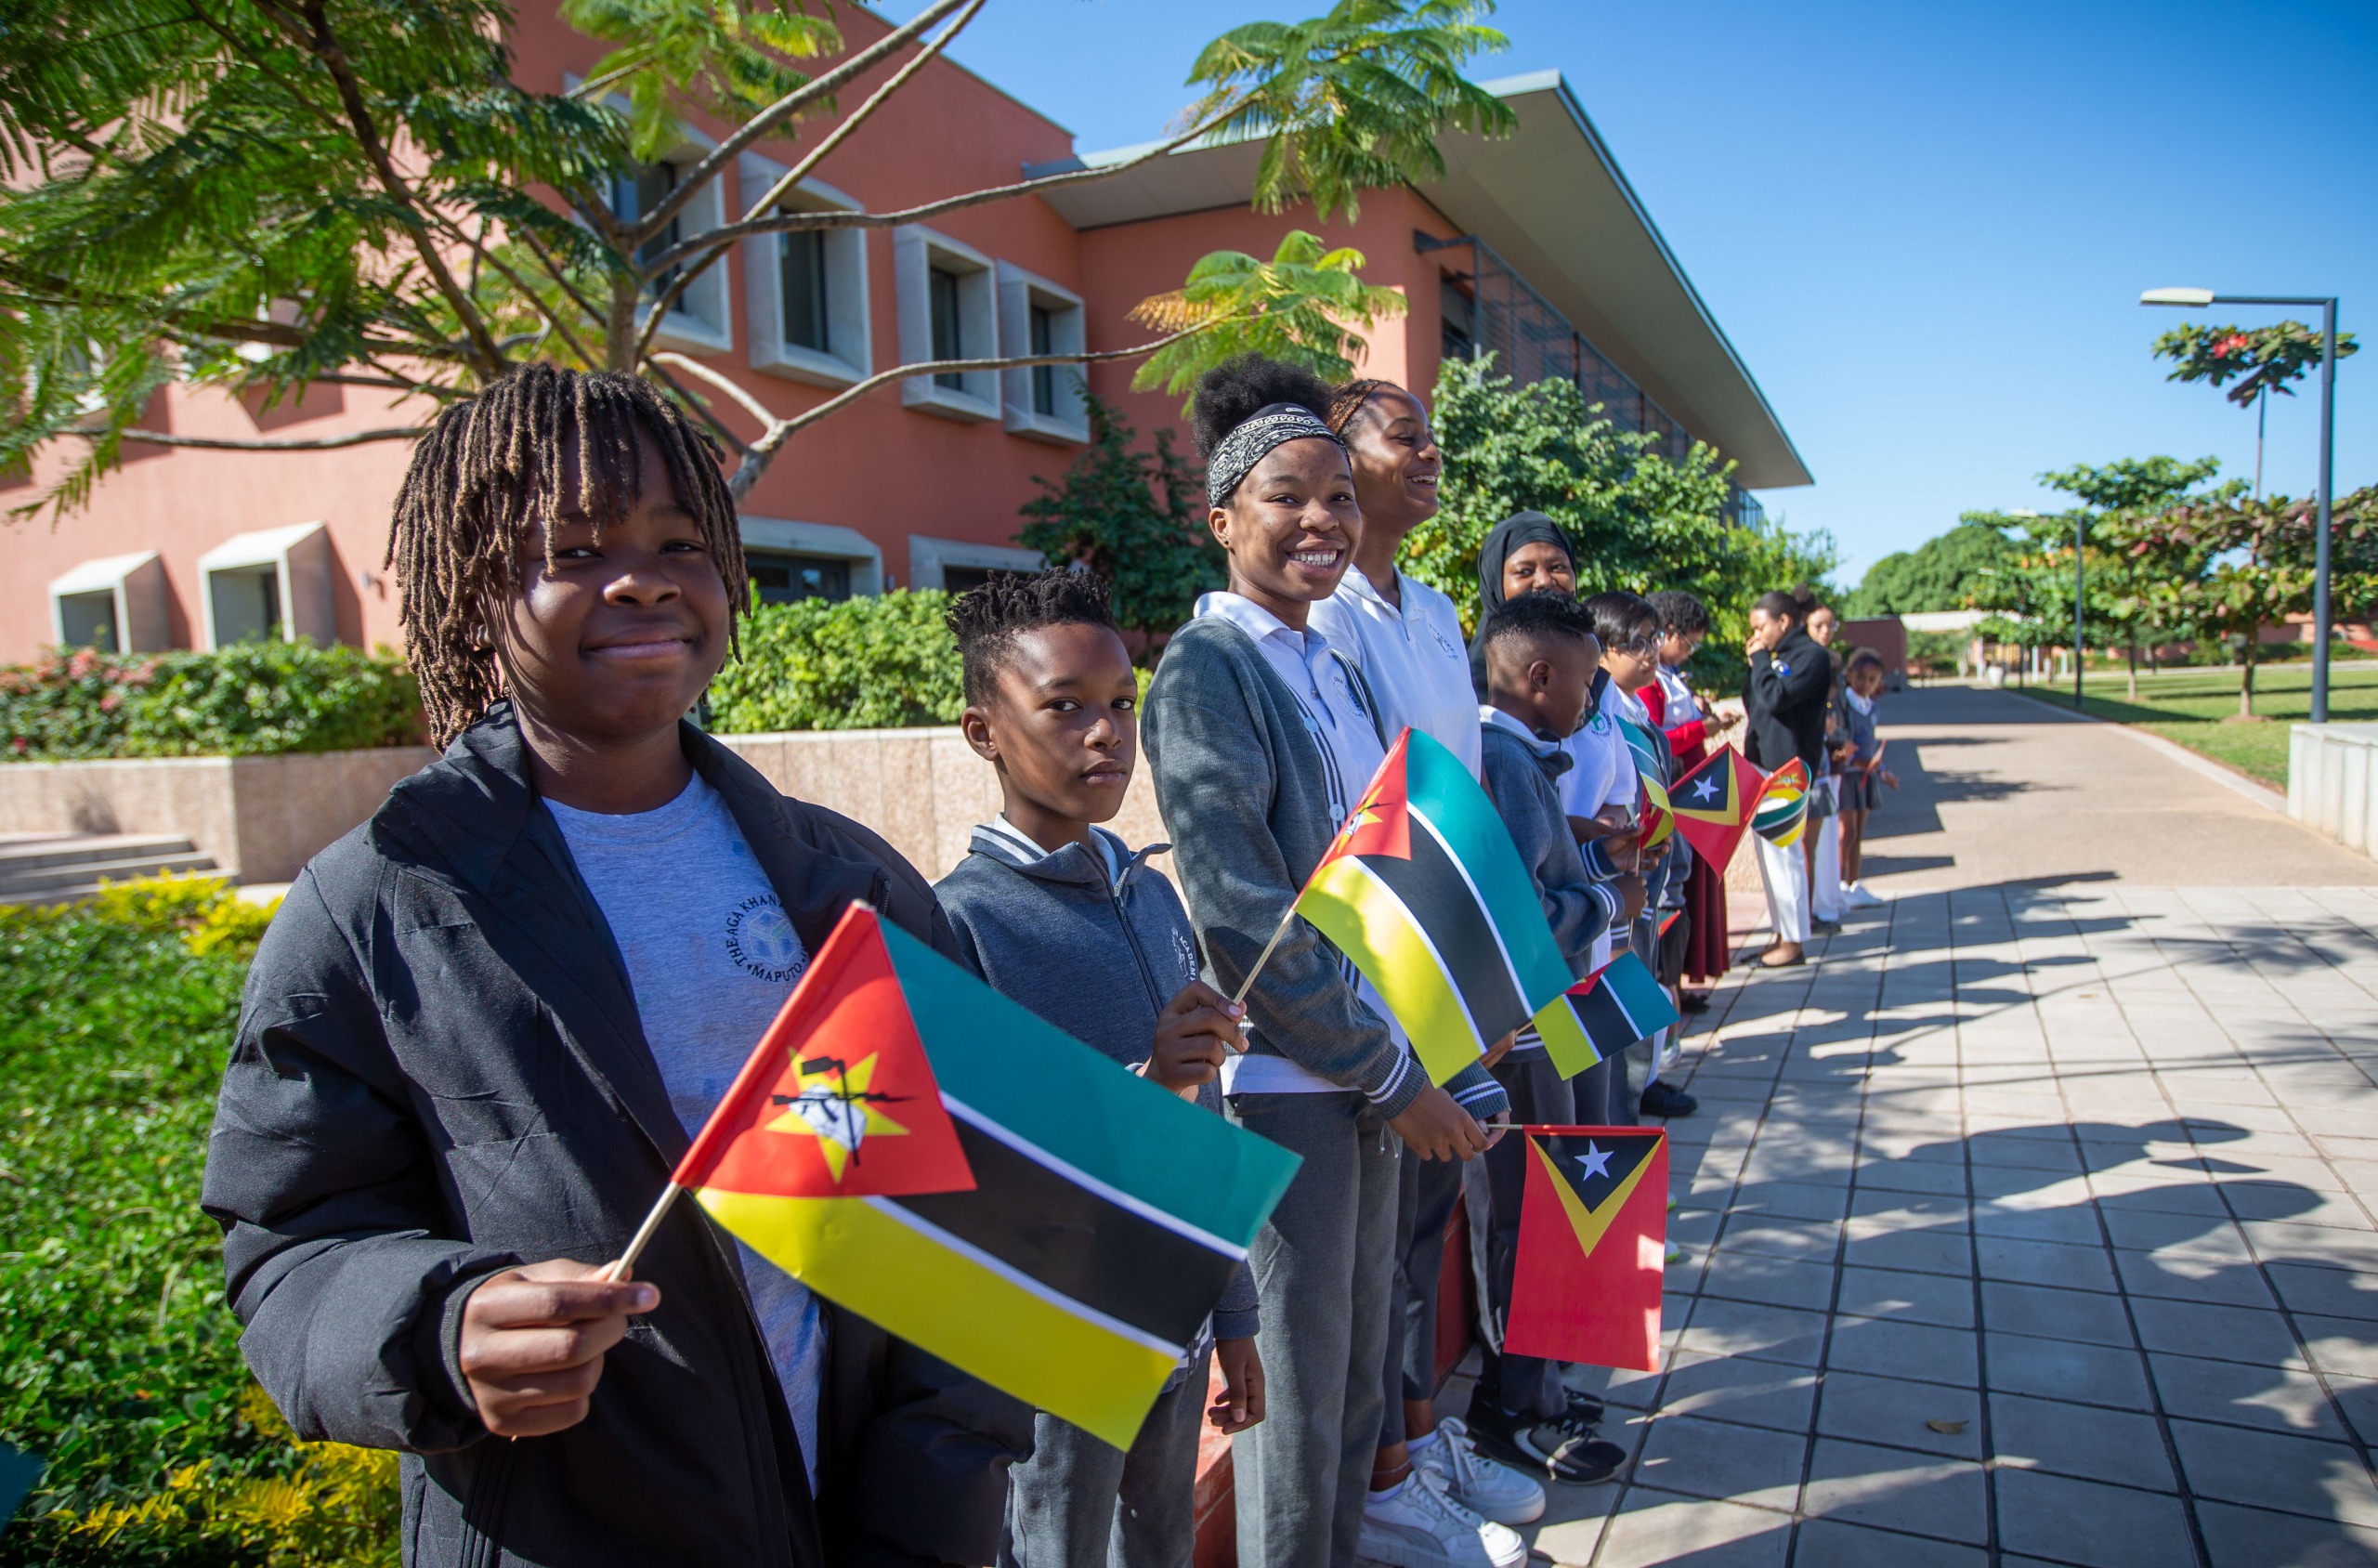 Students waved flags of Mozambique and the Democratic East of Timor.